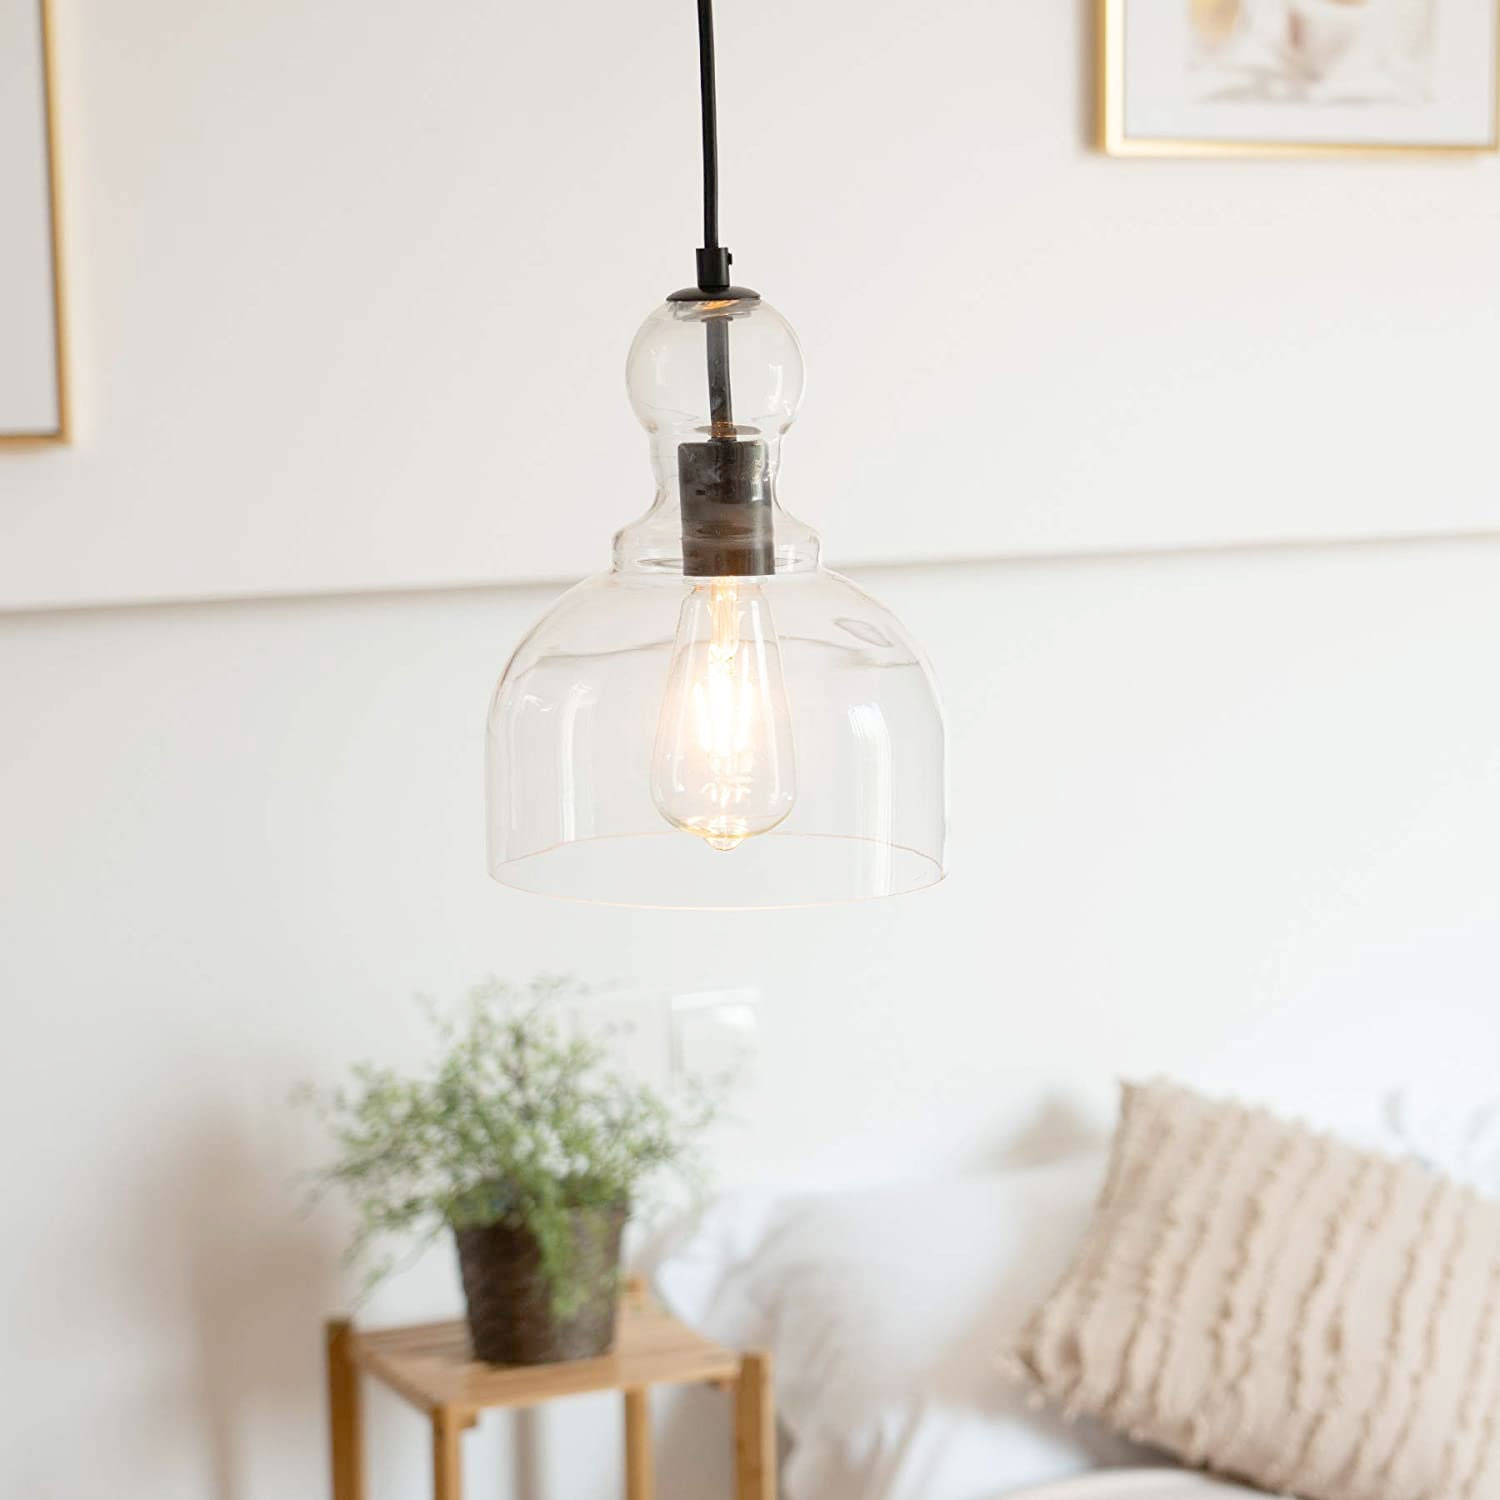 Amazon：CO-Z 150cm Adjustable Height Industrial and Vintage Farmhouse Suspended Single Pendant Lighting只賣$34.99